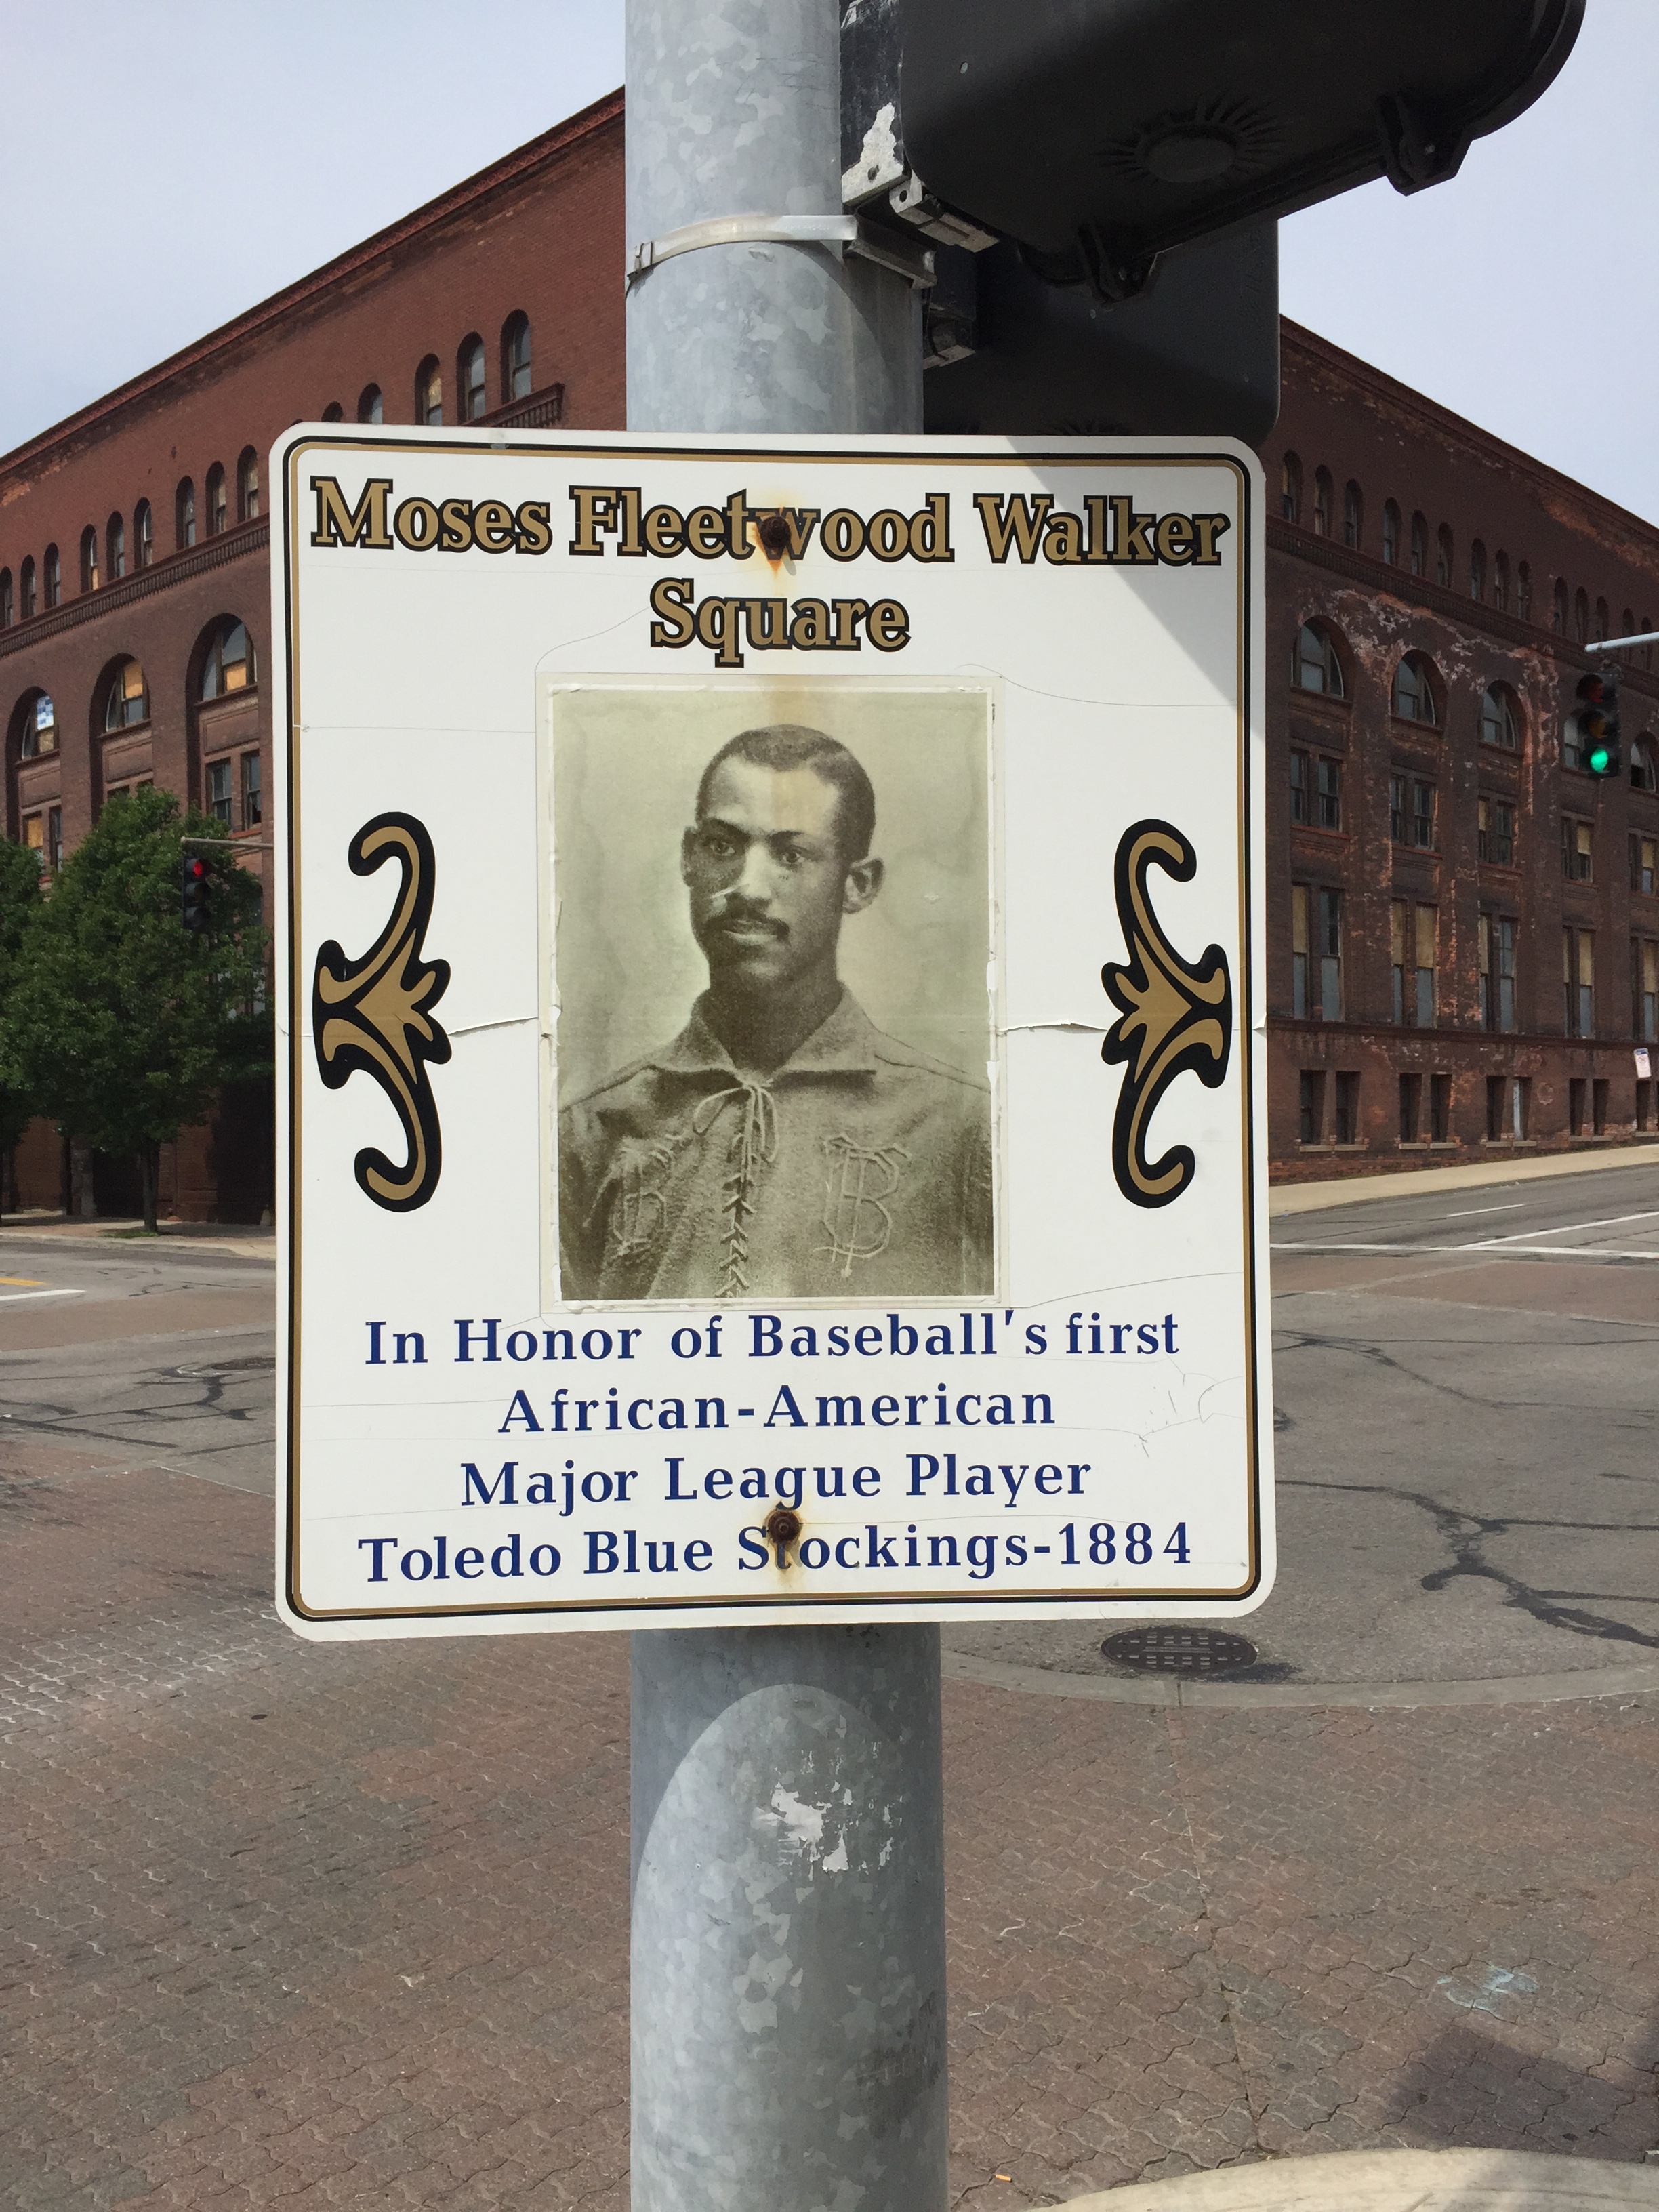 A Not-So-Hidden Gem of Baseball History and Fokelore – All Things Ed